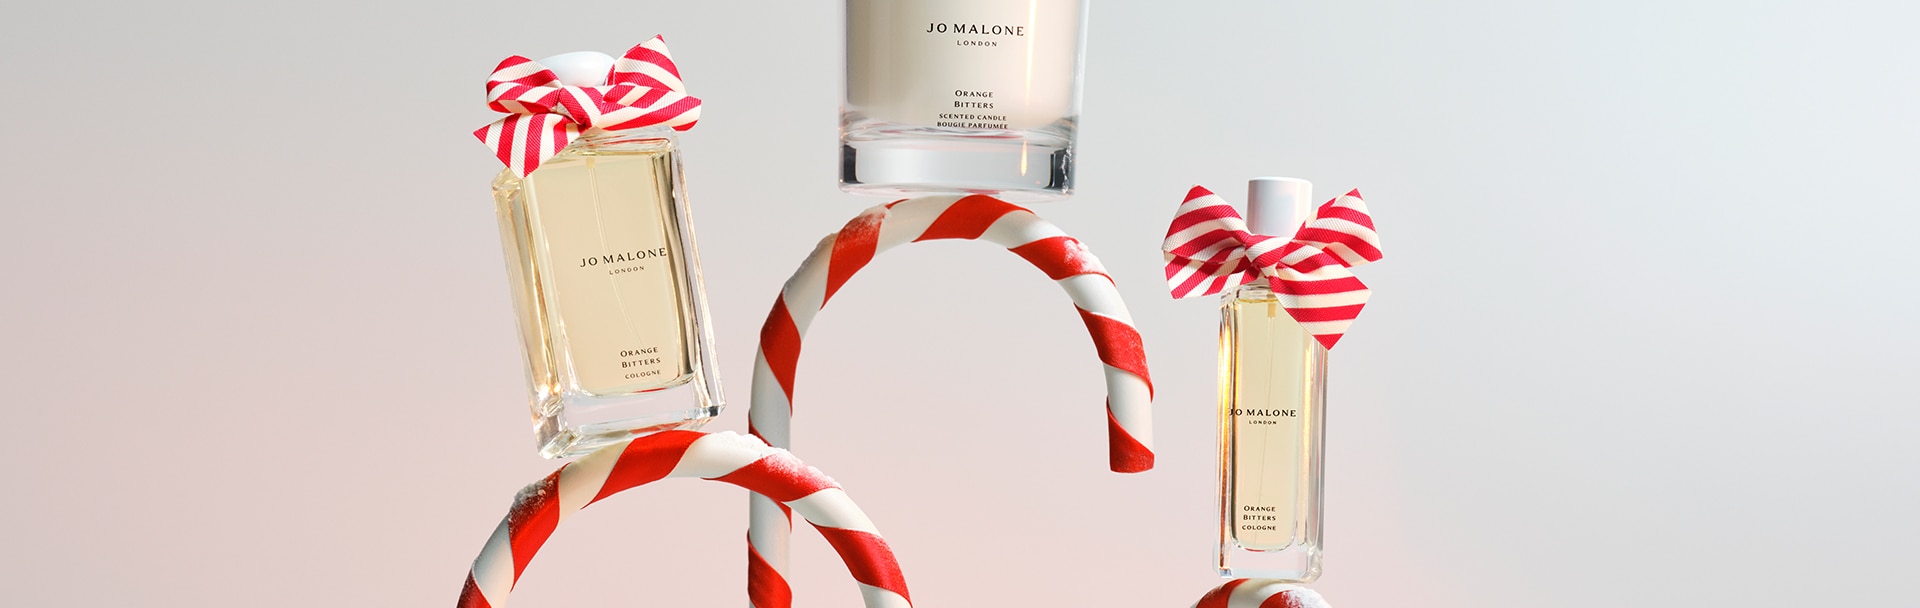 Jo Malone London Orange Bitters Collection Candle Cologne with red and white bows on red and white candy canes